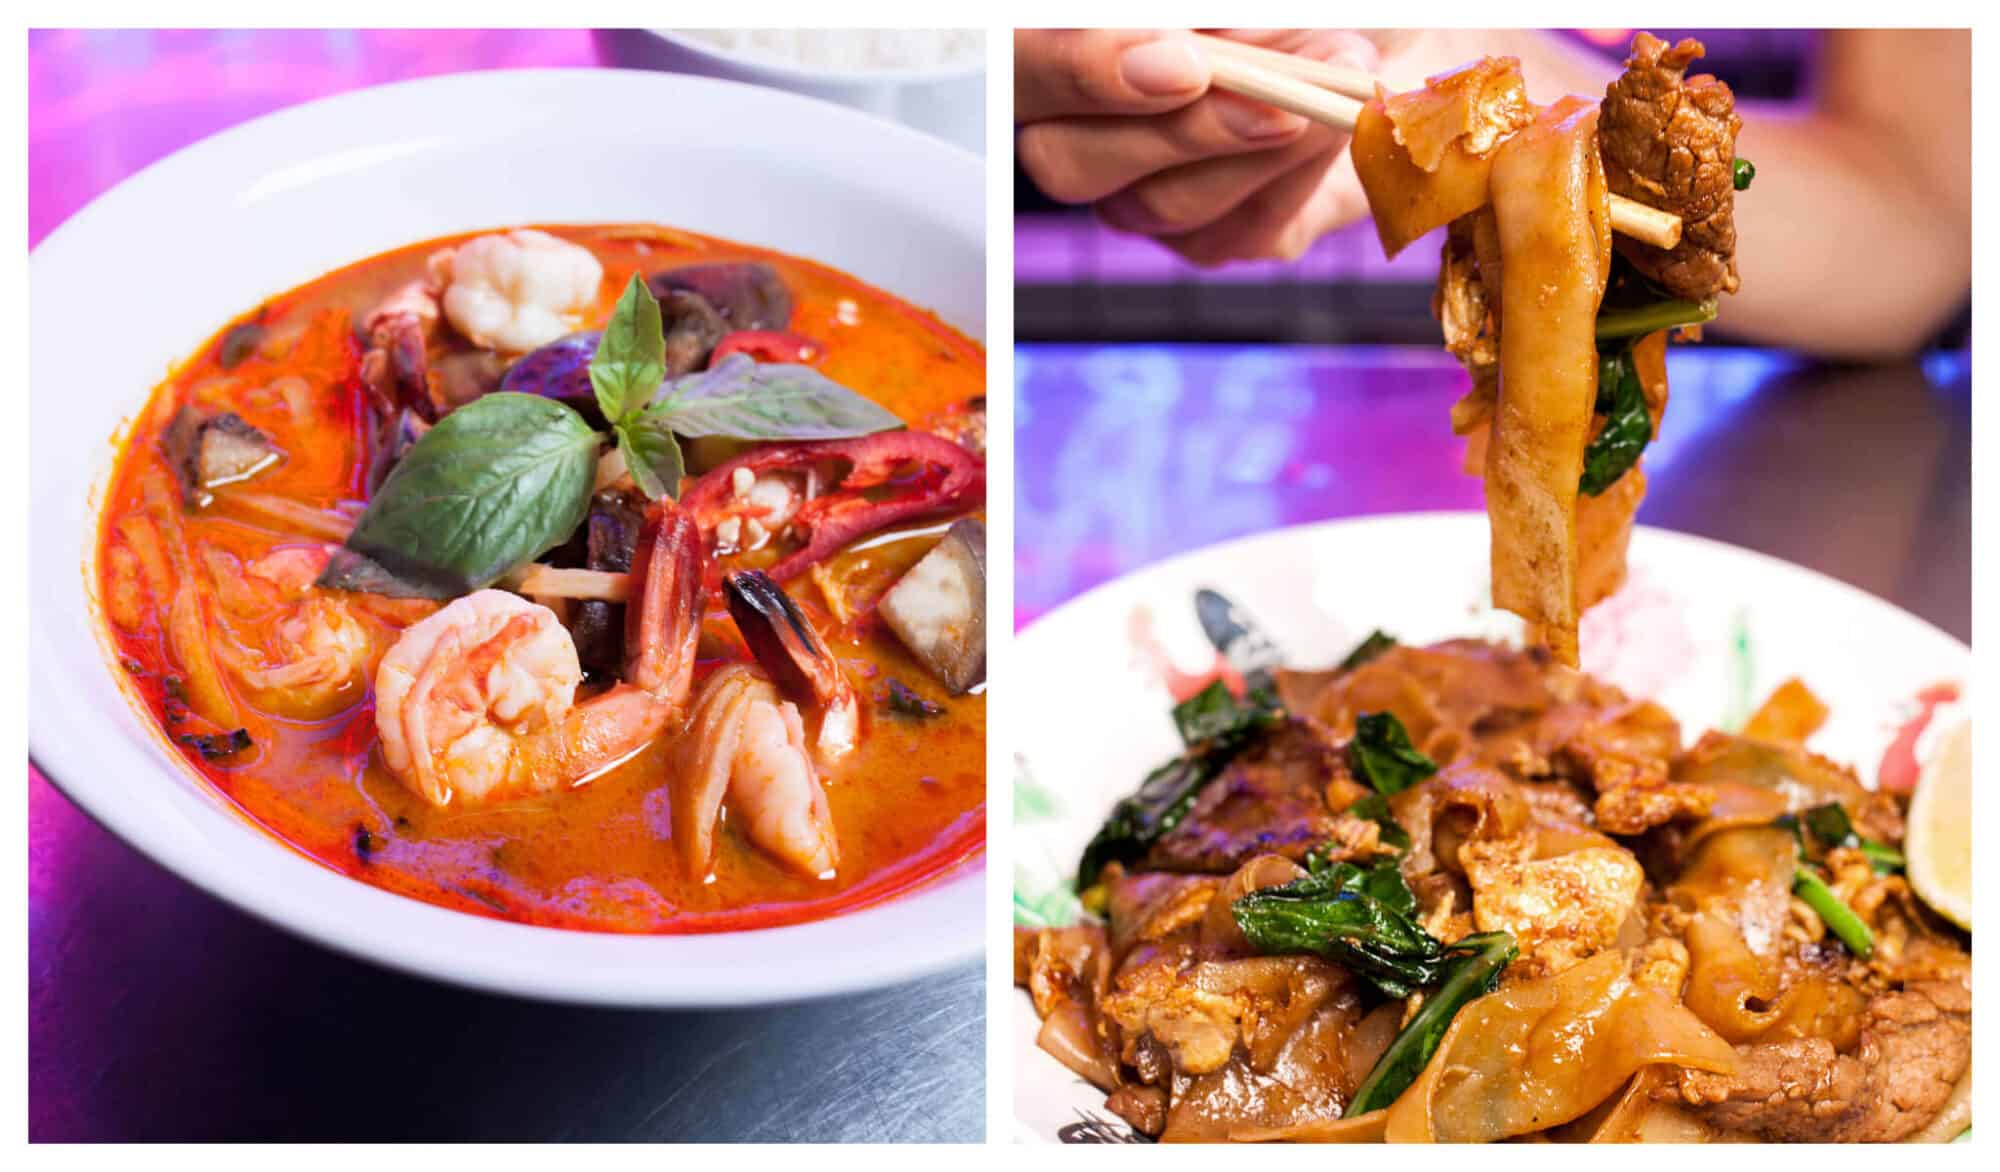 Left: A Thai red curry with shrimp and red peppers from Street Bangkok. Right: a noodle dish with beef and basil from the same restaurant in Paris.